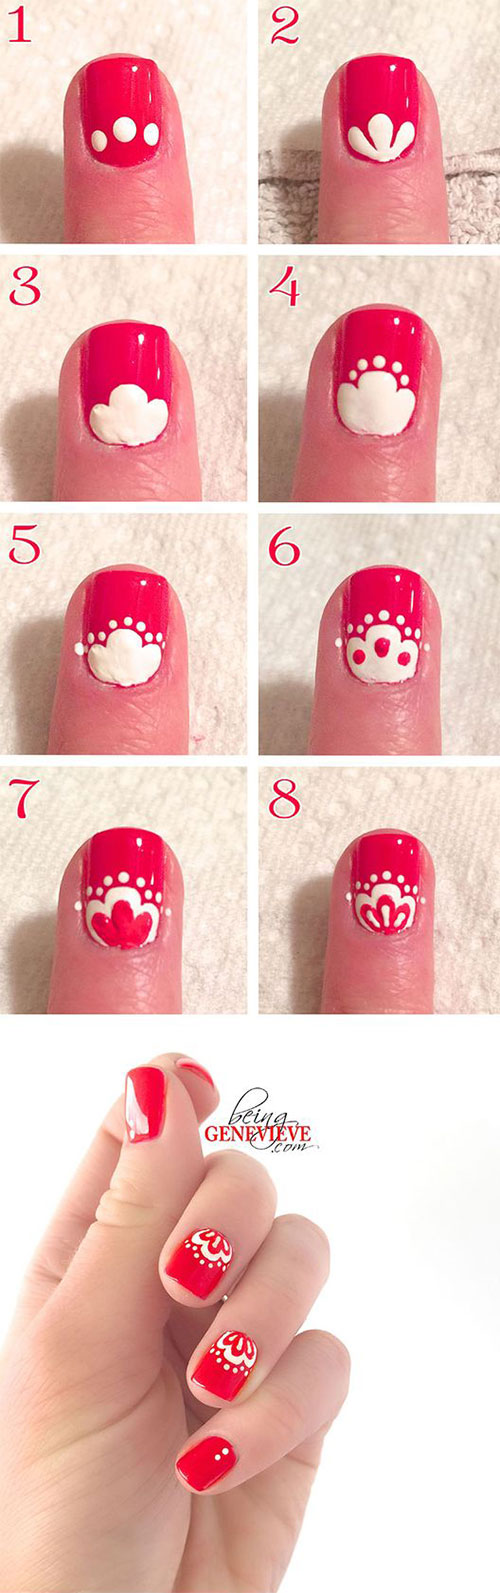 15-Easy-Spring-Nails-Tutorials-For-Beginners-Learners-2016-15